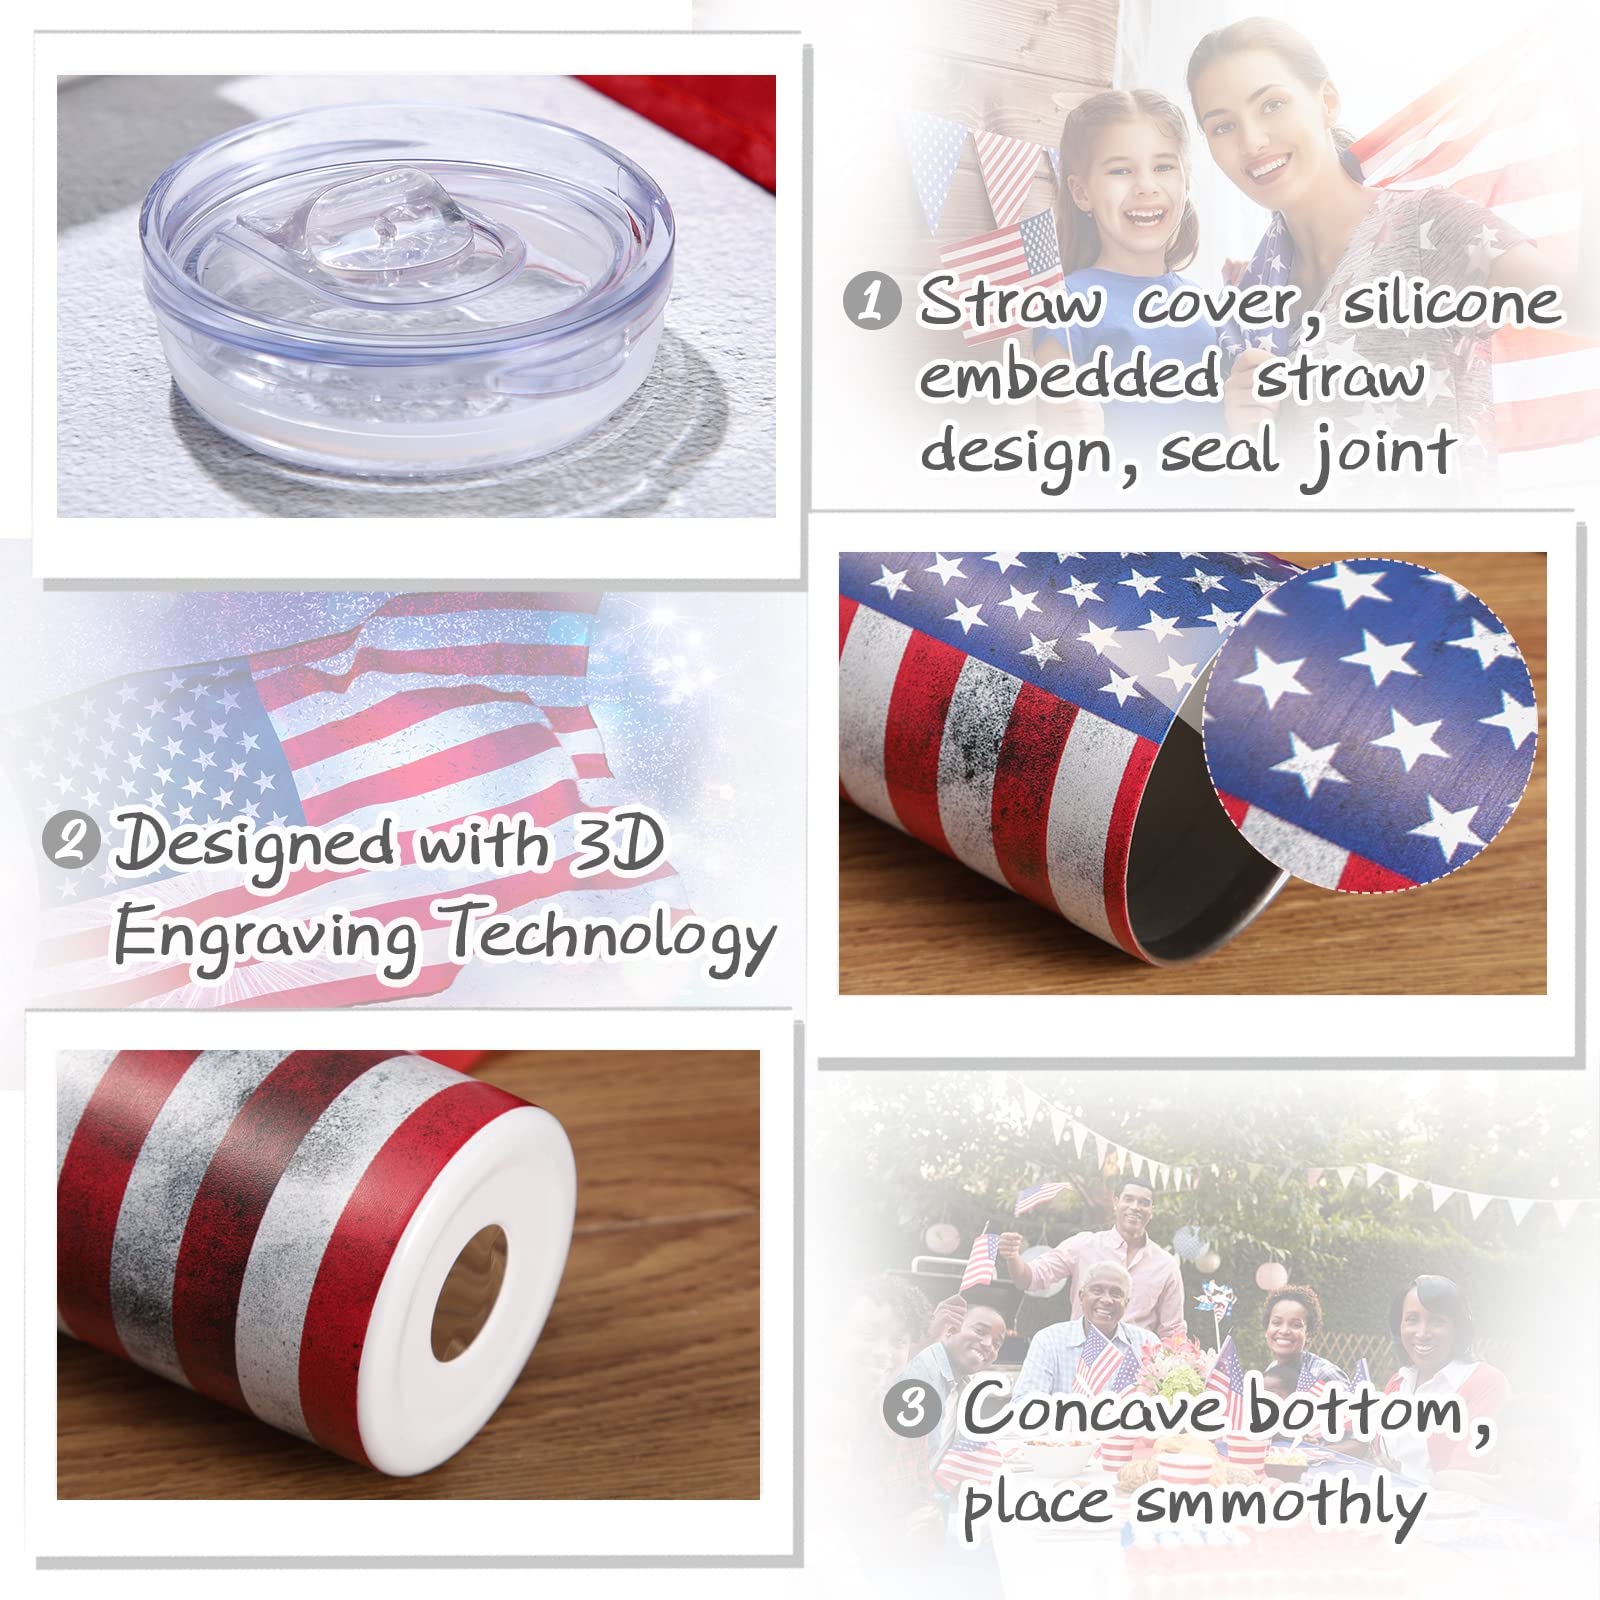 American Flag Water Tumbler, 4th of July Gifts Patriotic Cup, Patriotic Party Supplies for Labor Day, Memorial, Veterans Day, 20 oz Vacuum Insulated Tumbler with Lid, Straw and Brush (Stylish Style)